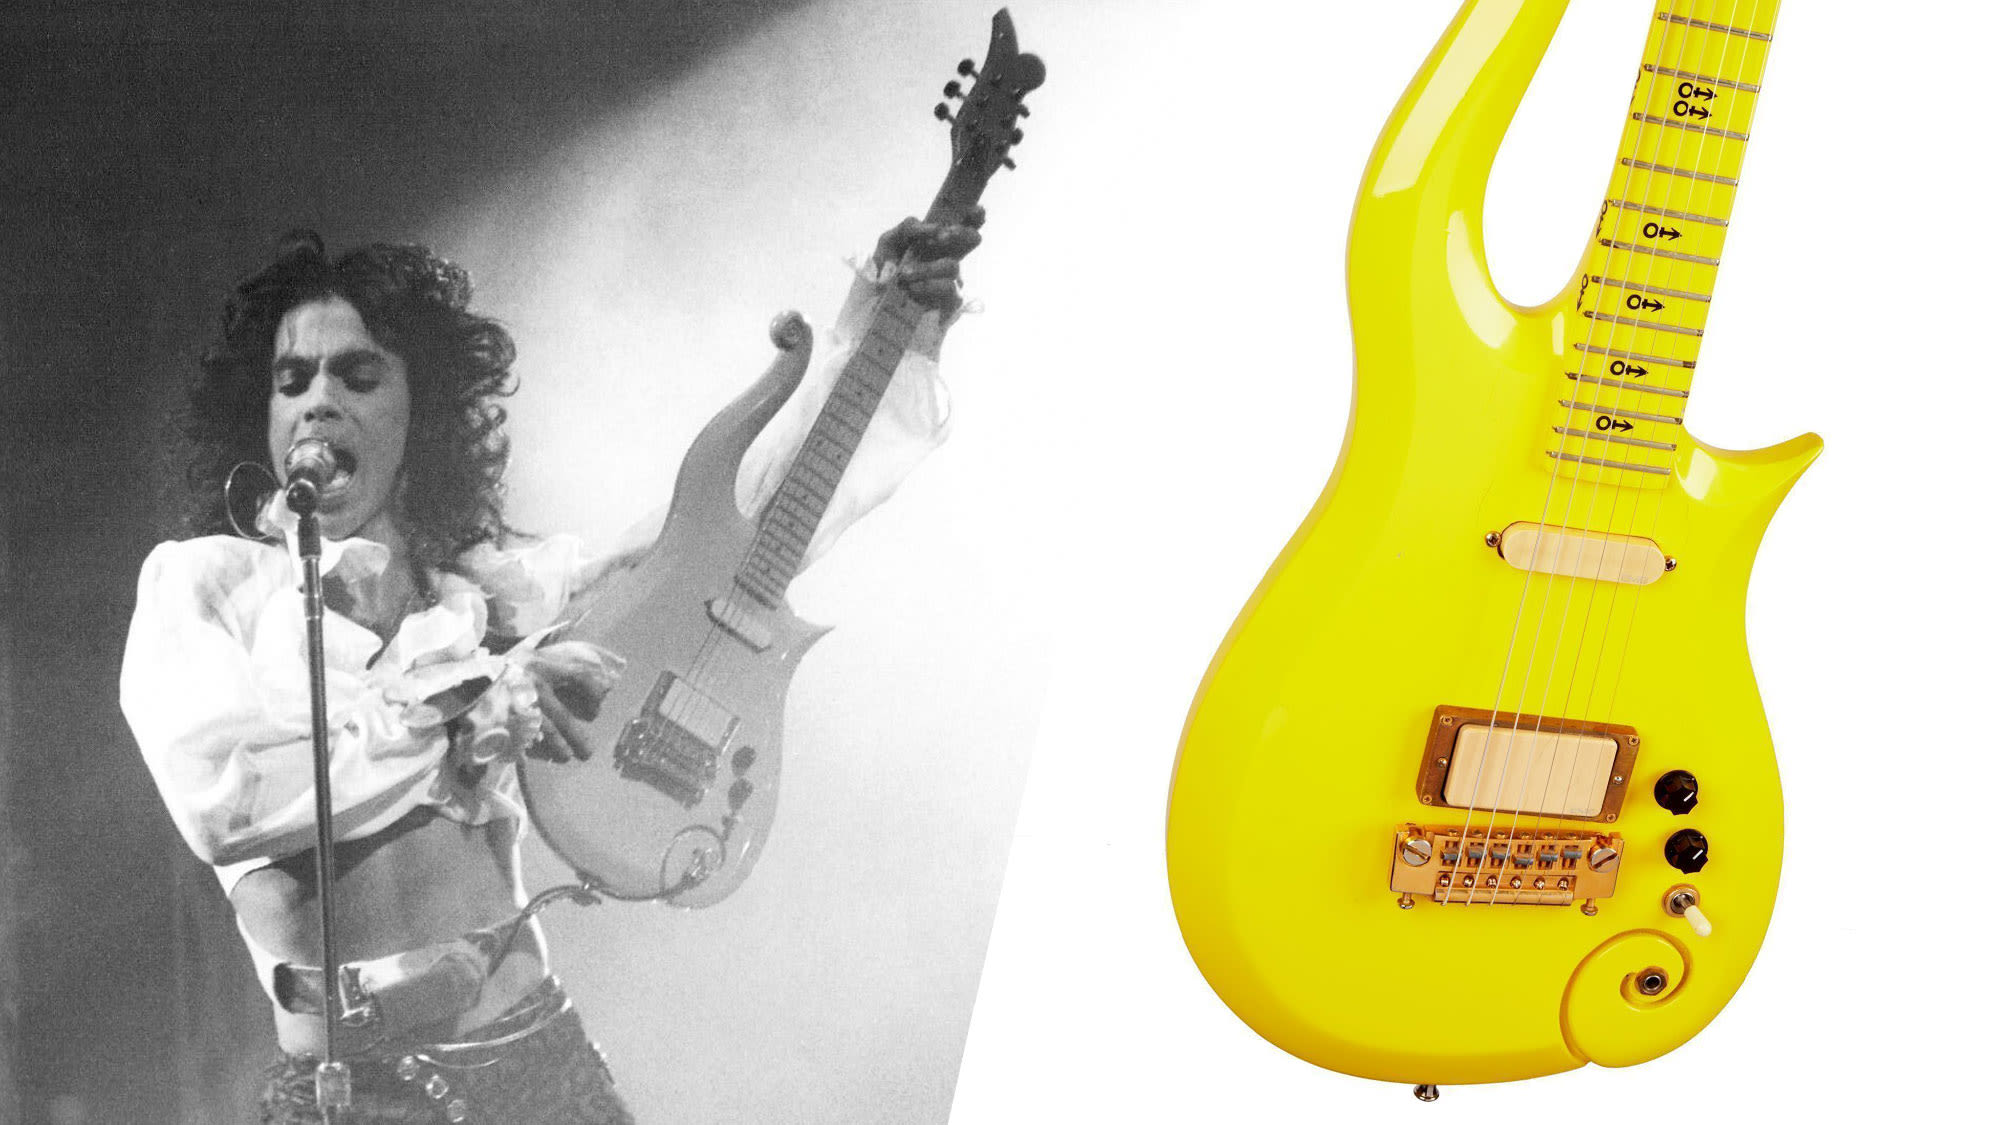 In 2005, Prince’s Cloud 3 sold for $10,000. Now it’s expected to fetch $600,000 at auction